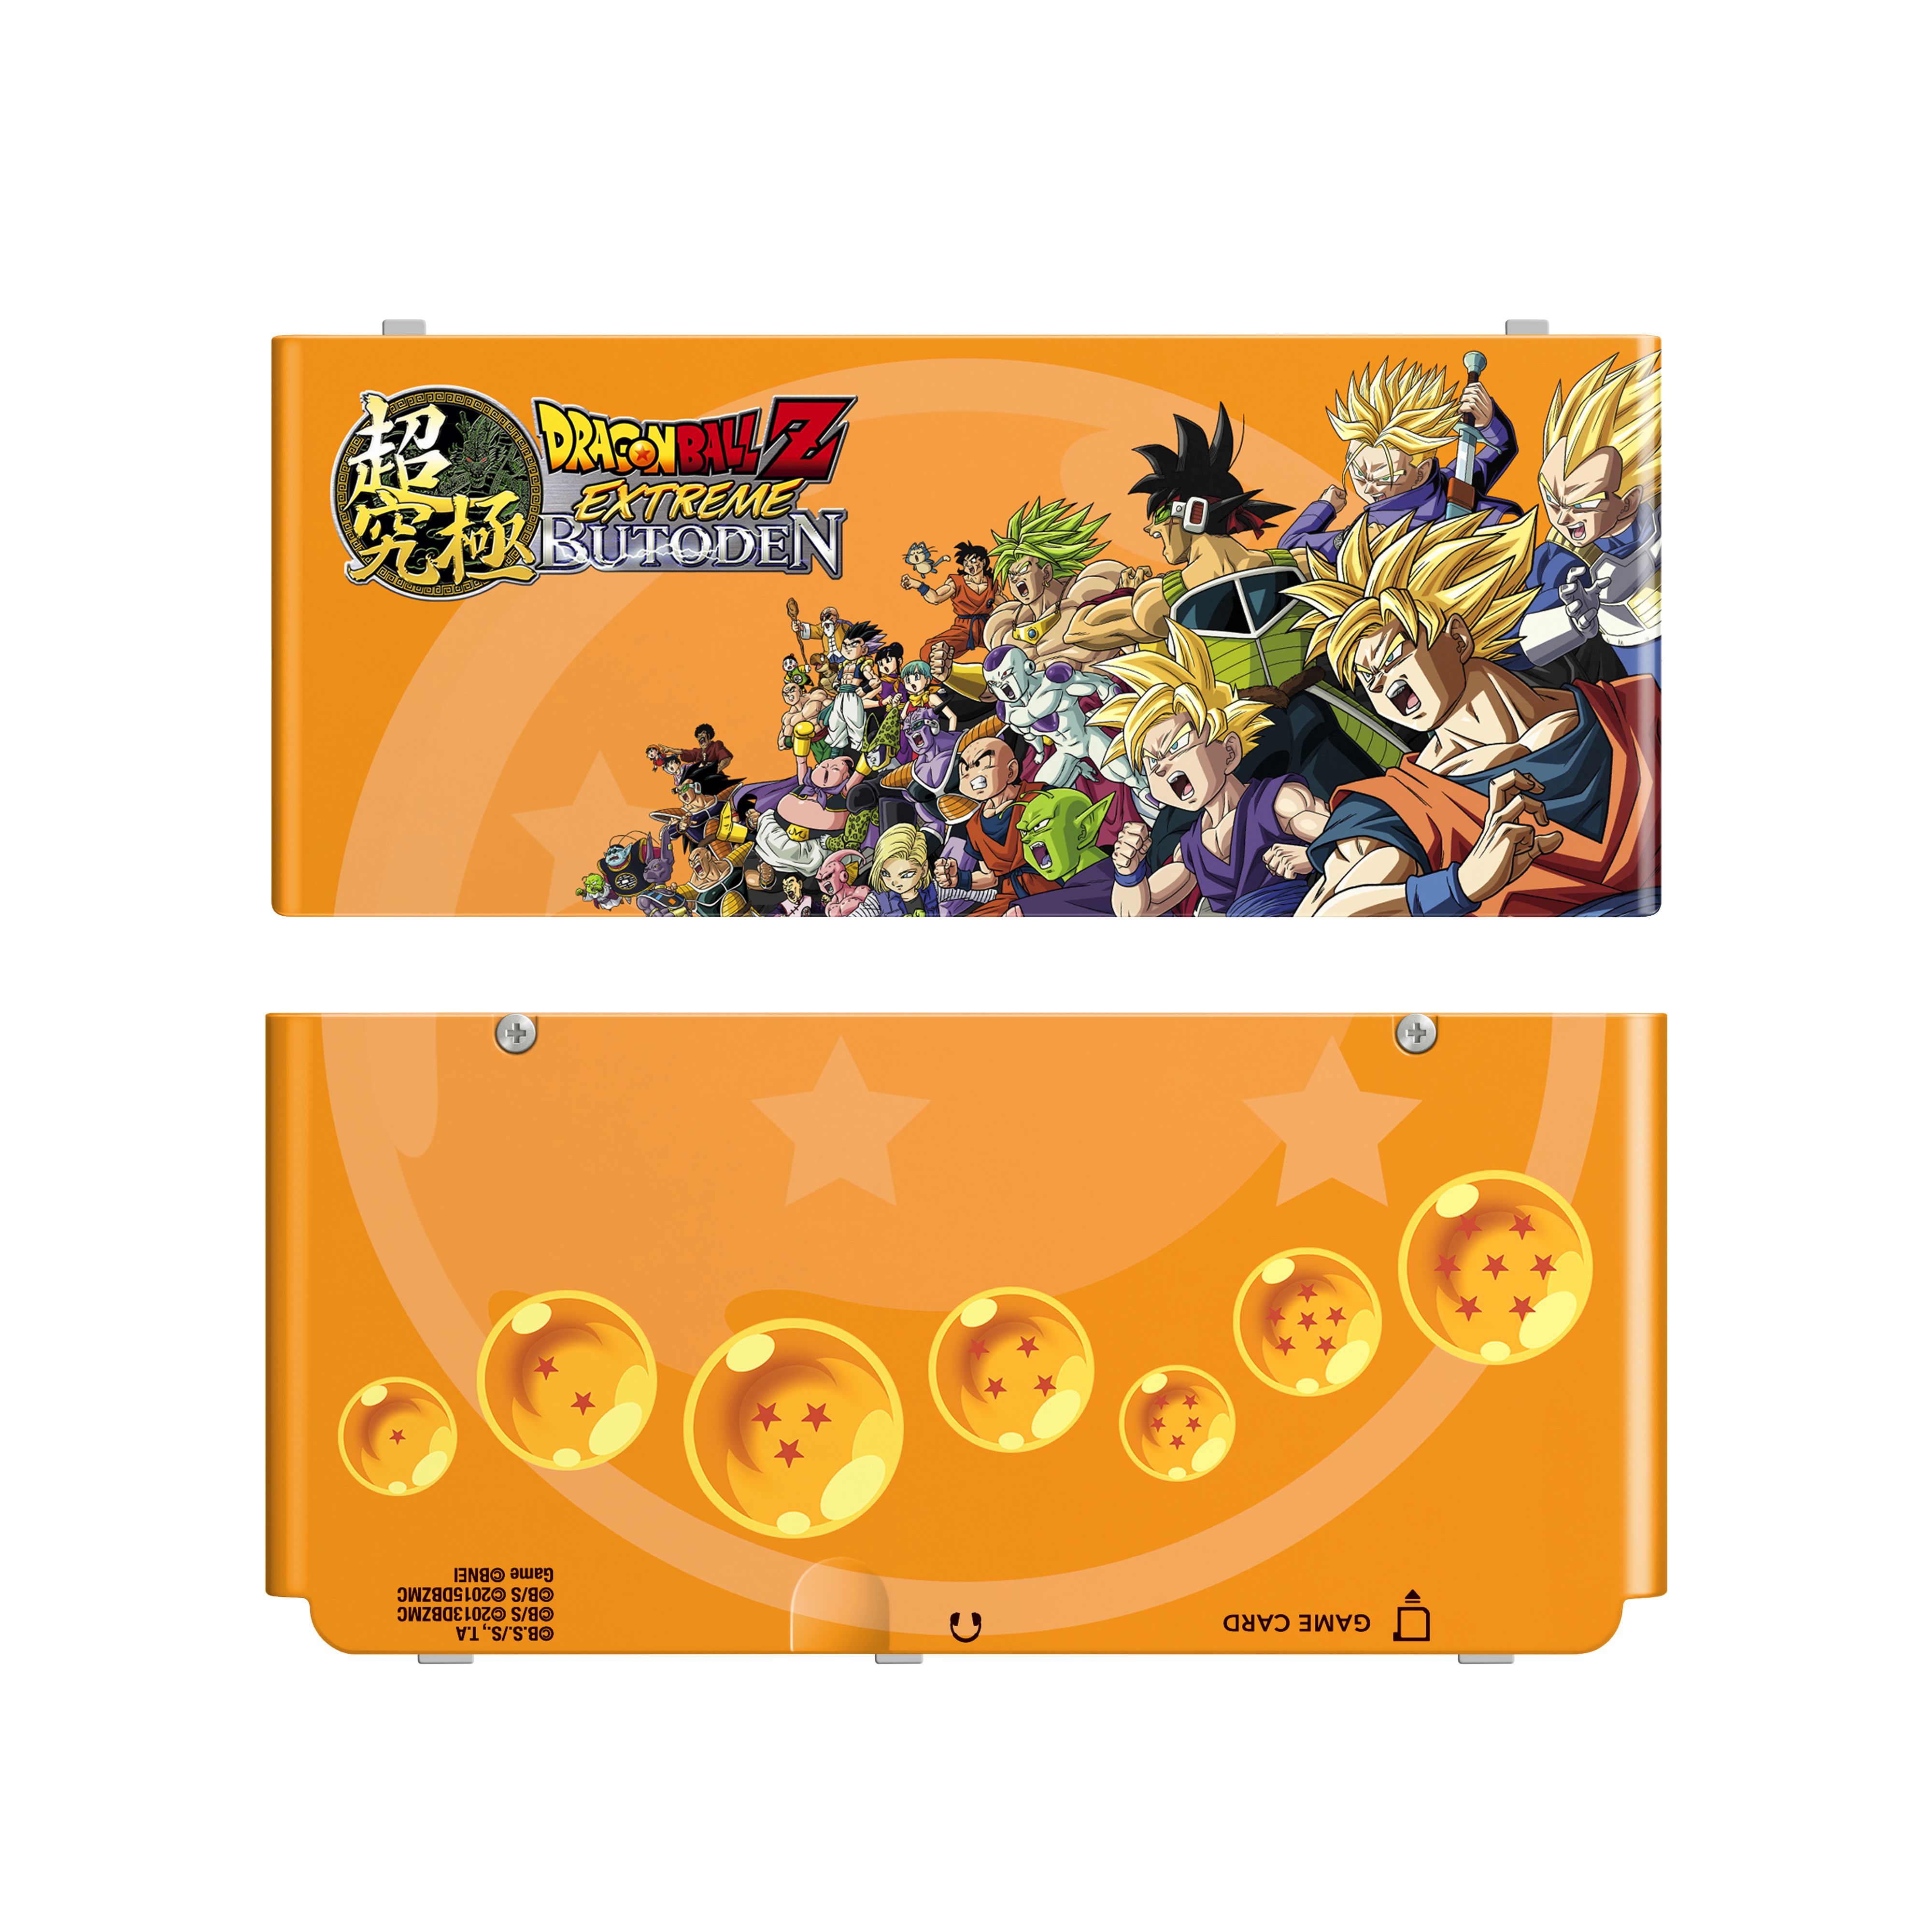 Dbz Extreme Butoden Packaging Of The New 3ds Bundle Ssgss Vegata Unlock Codes Perfectly Nintendo